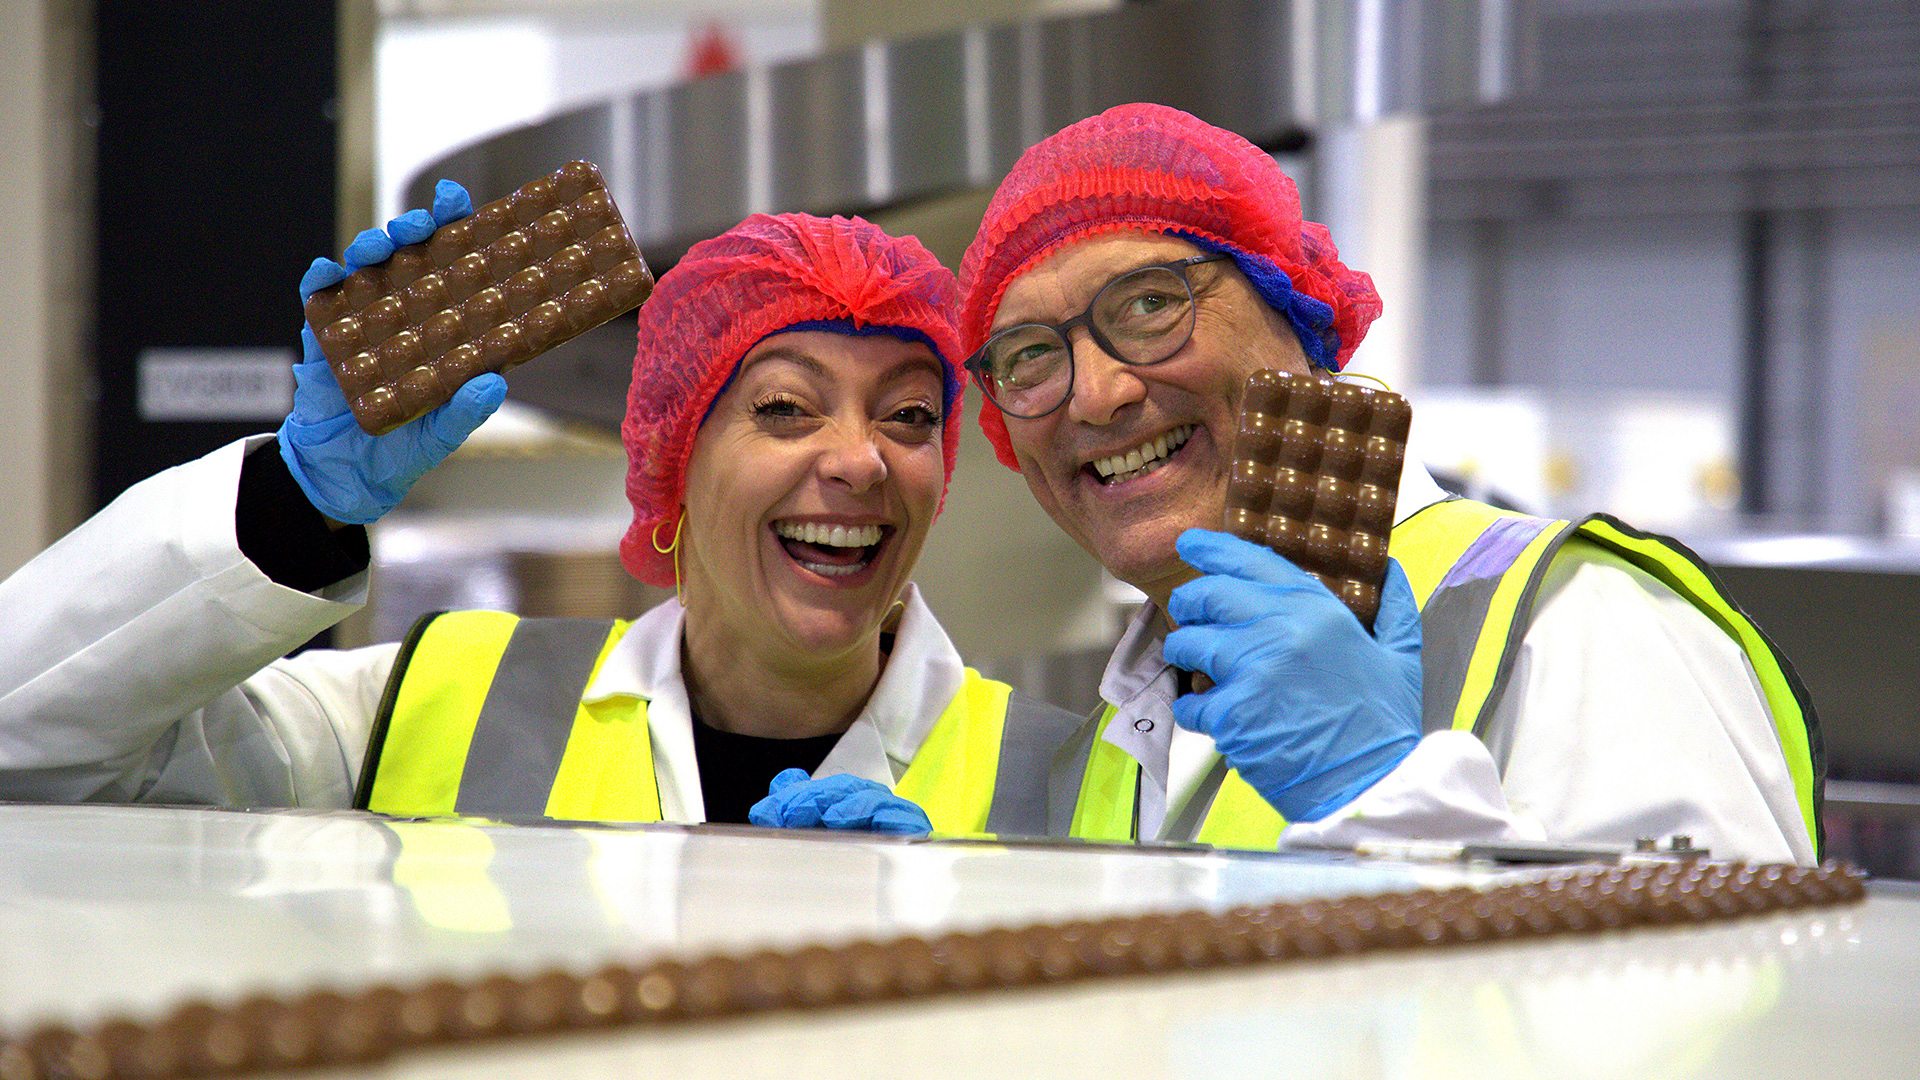 Cherry and Gregg in a Chocolate Factory